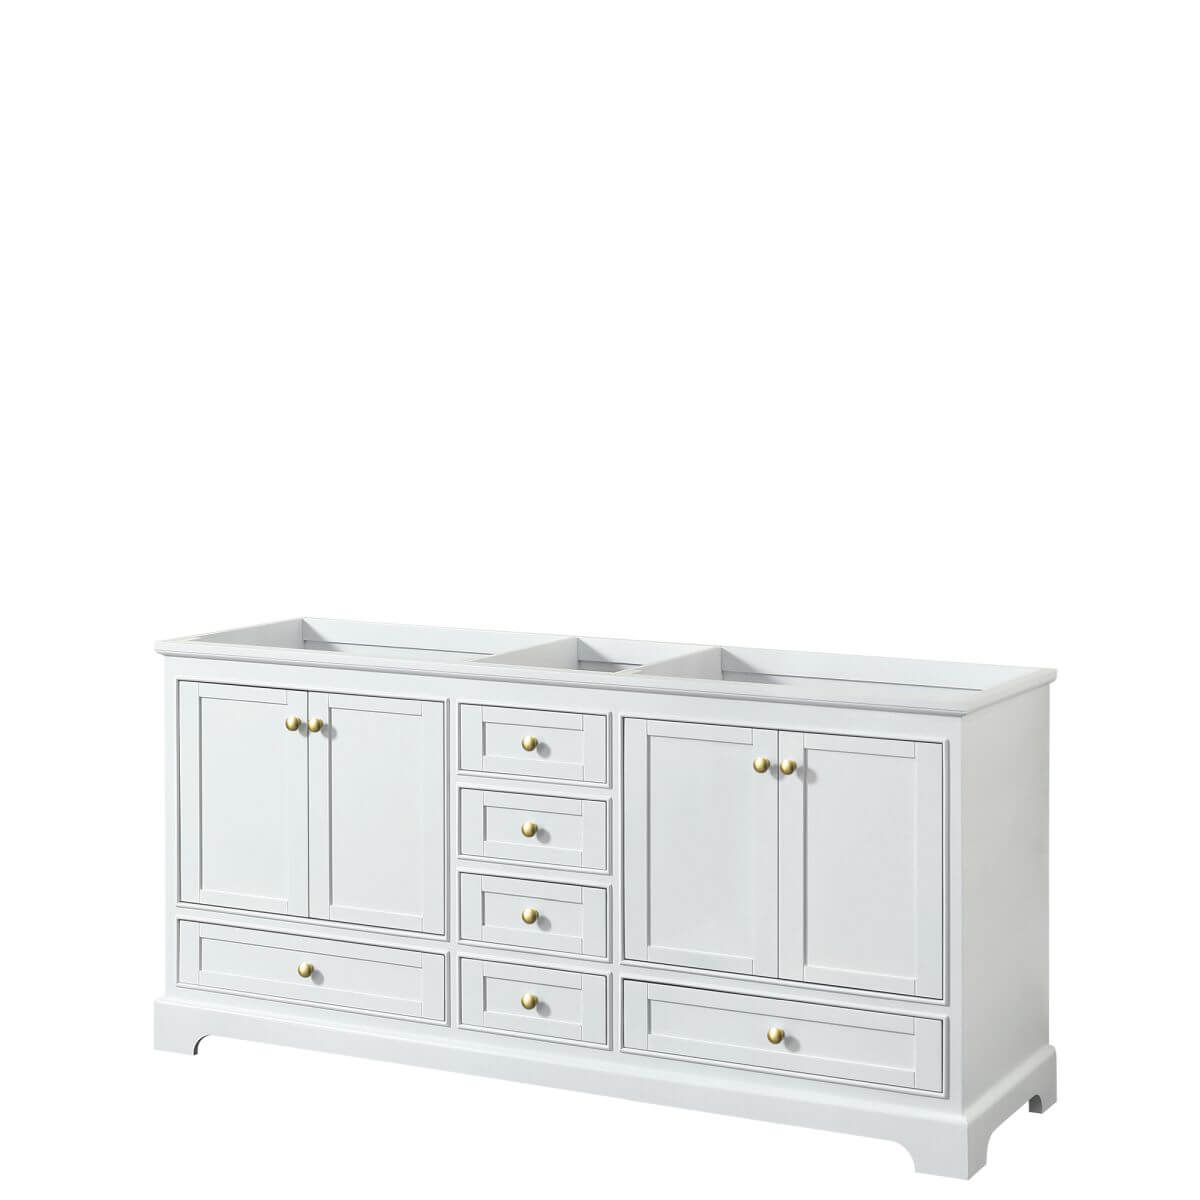 Wyndham Collection Deborah 72 inch Double Bathroom Vanity in White with Brushed Gold Trim, No Countertop, No Sinks and No Mirrors - WCS202072DWGCXSXXMXX